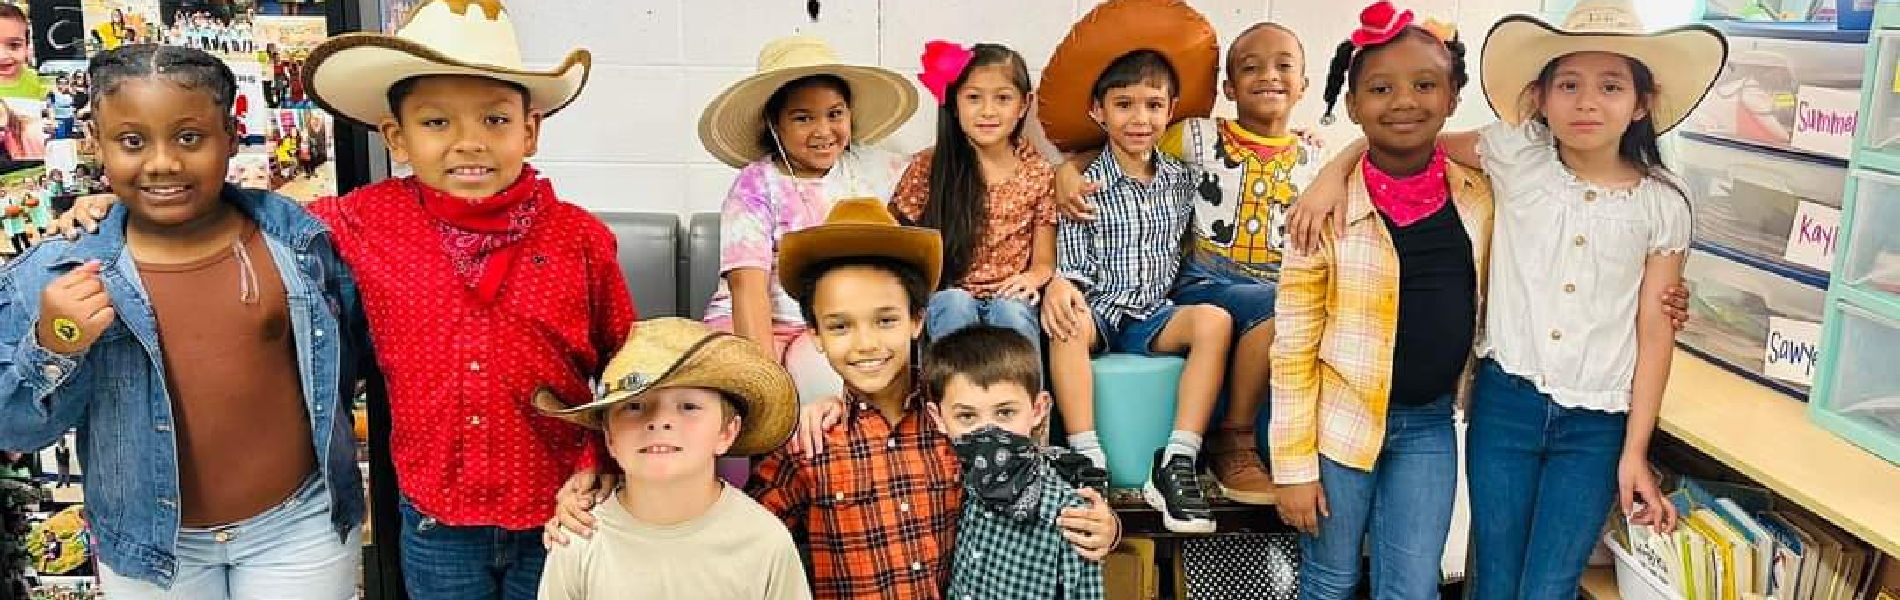 Students Celebrating Homecoming Week with Western Wear